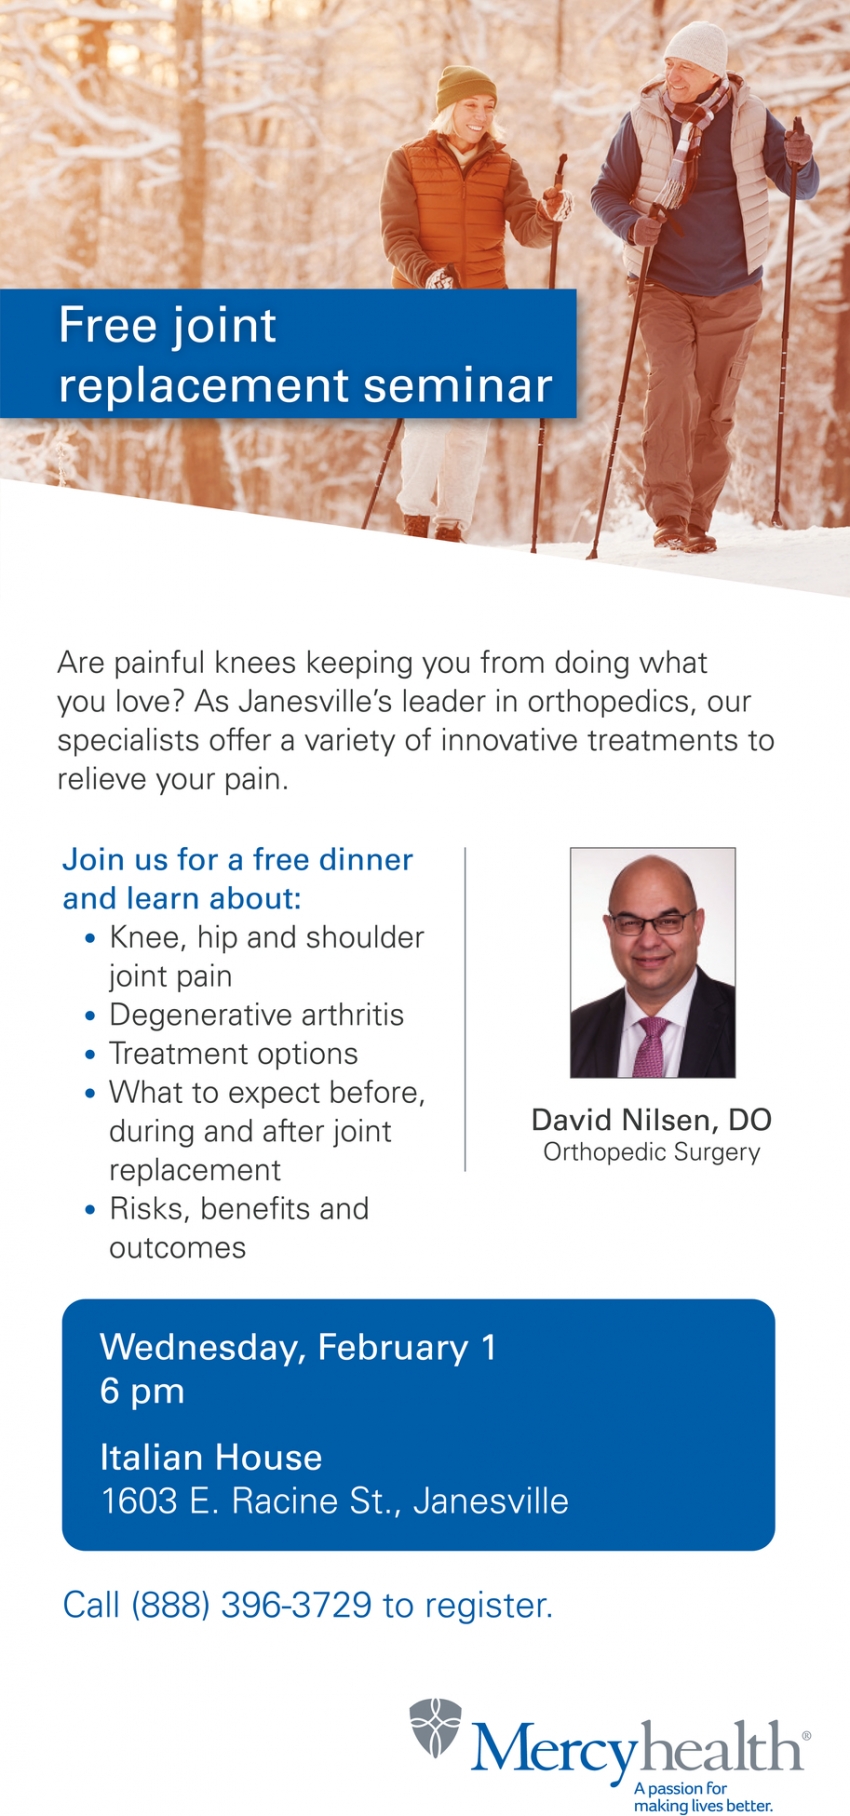 Free Joint Replacement Seminar